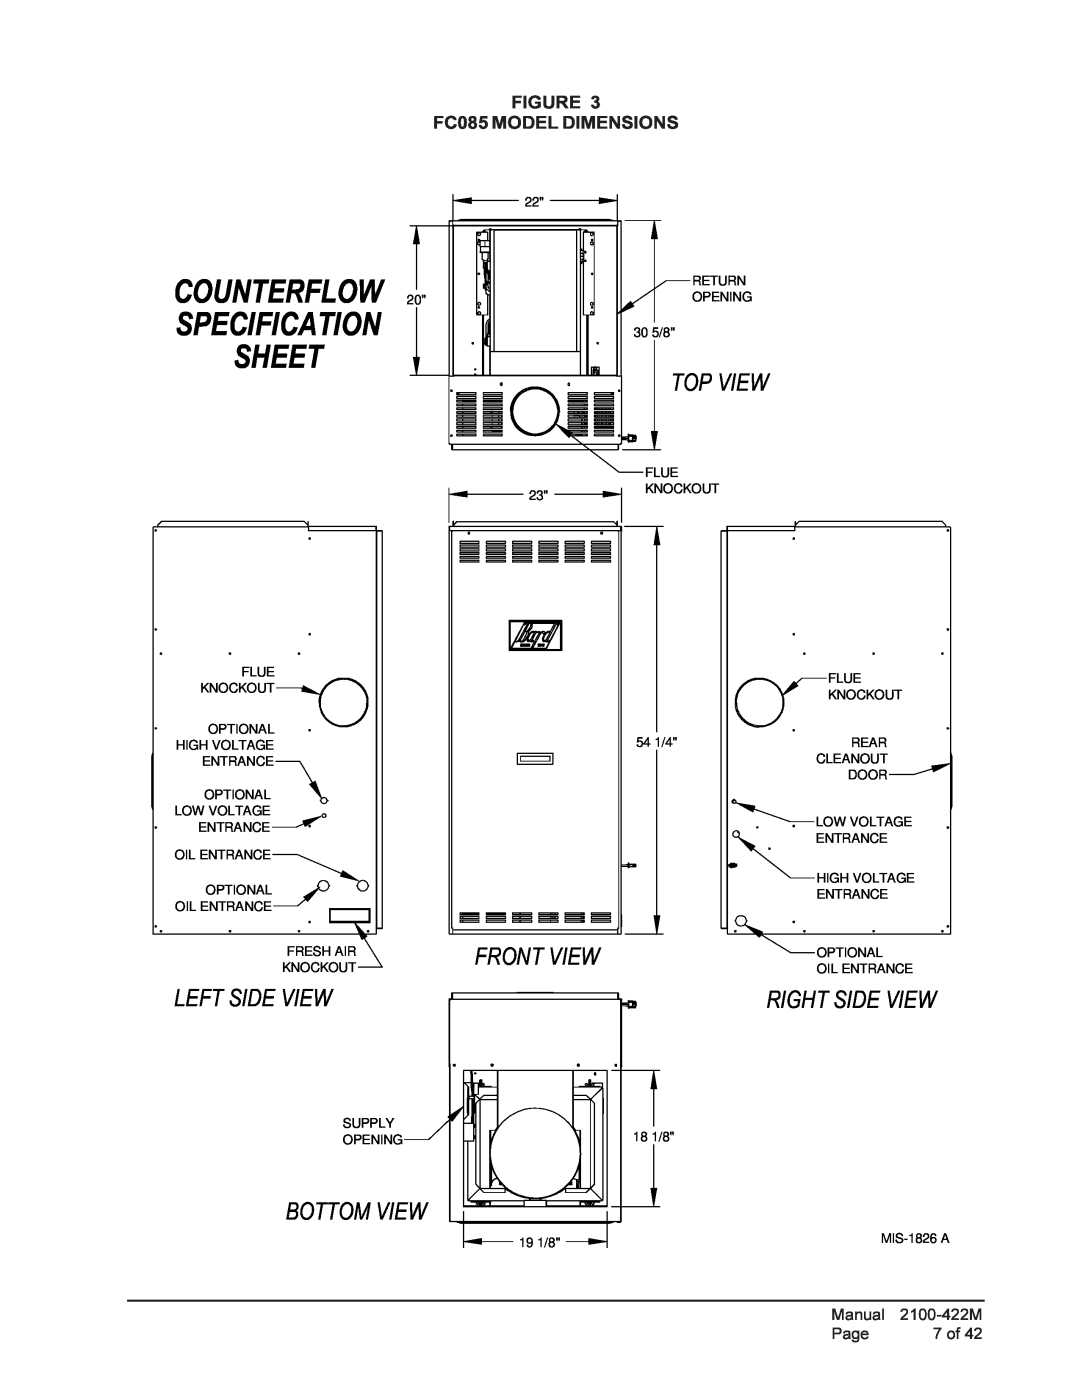 Bard FLR110D60F Counterflow Specification Sheet, Top View, Left Side View, Front View, Right Side View, Bottom View 